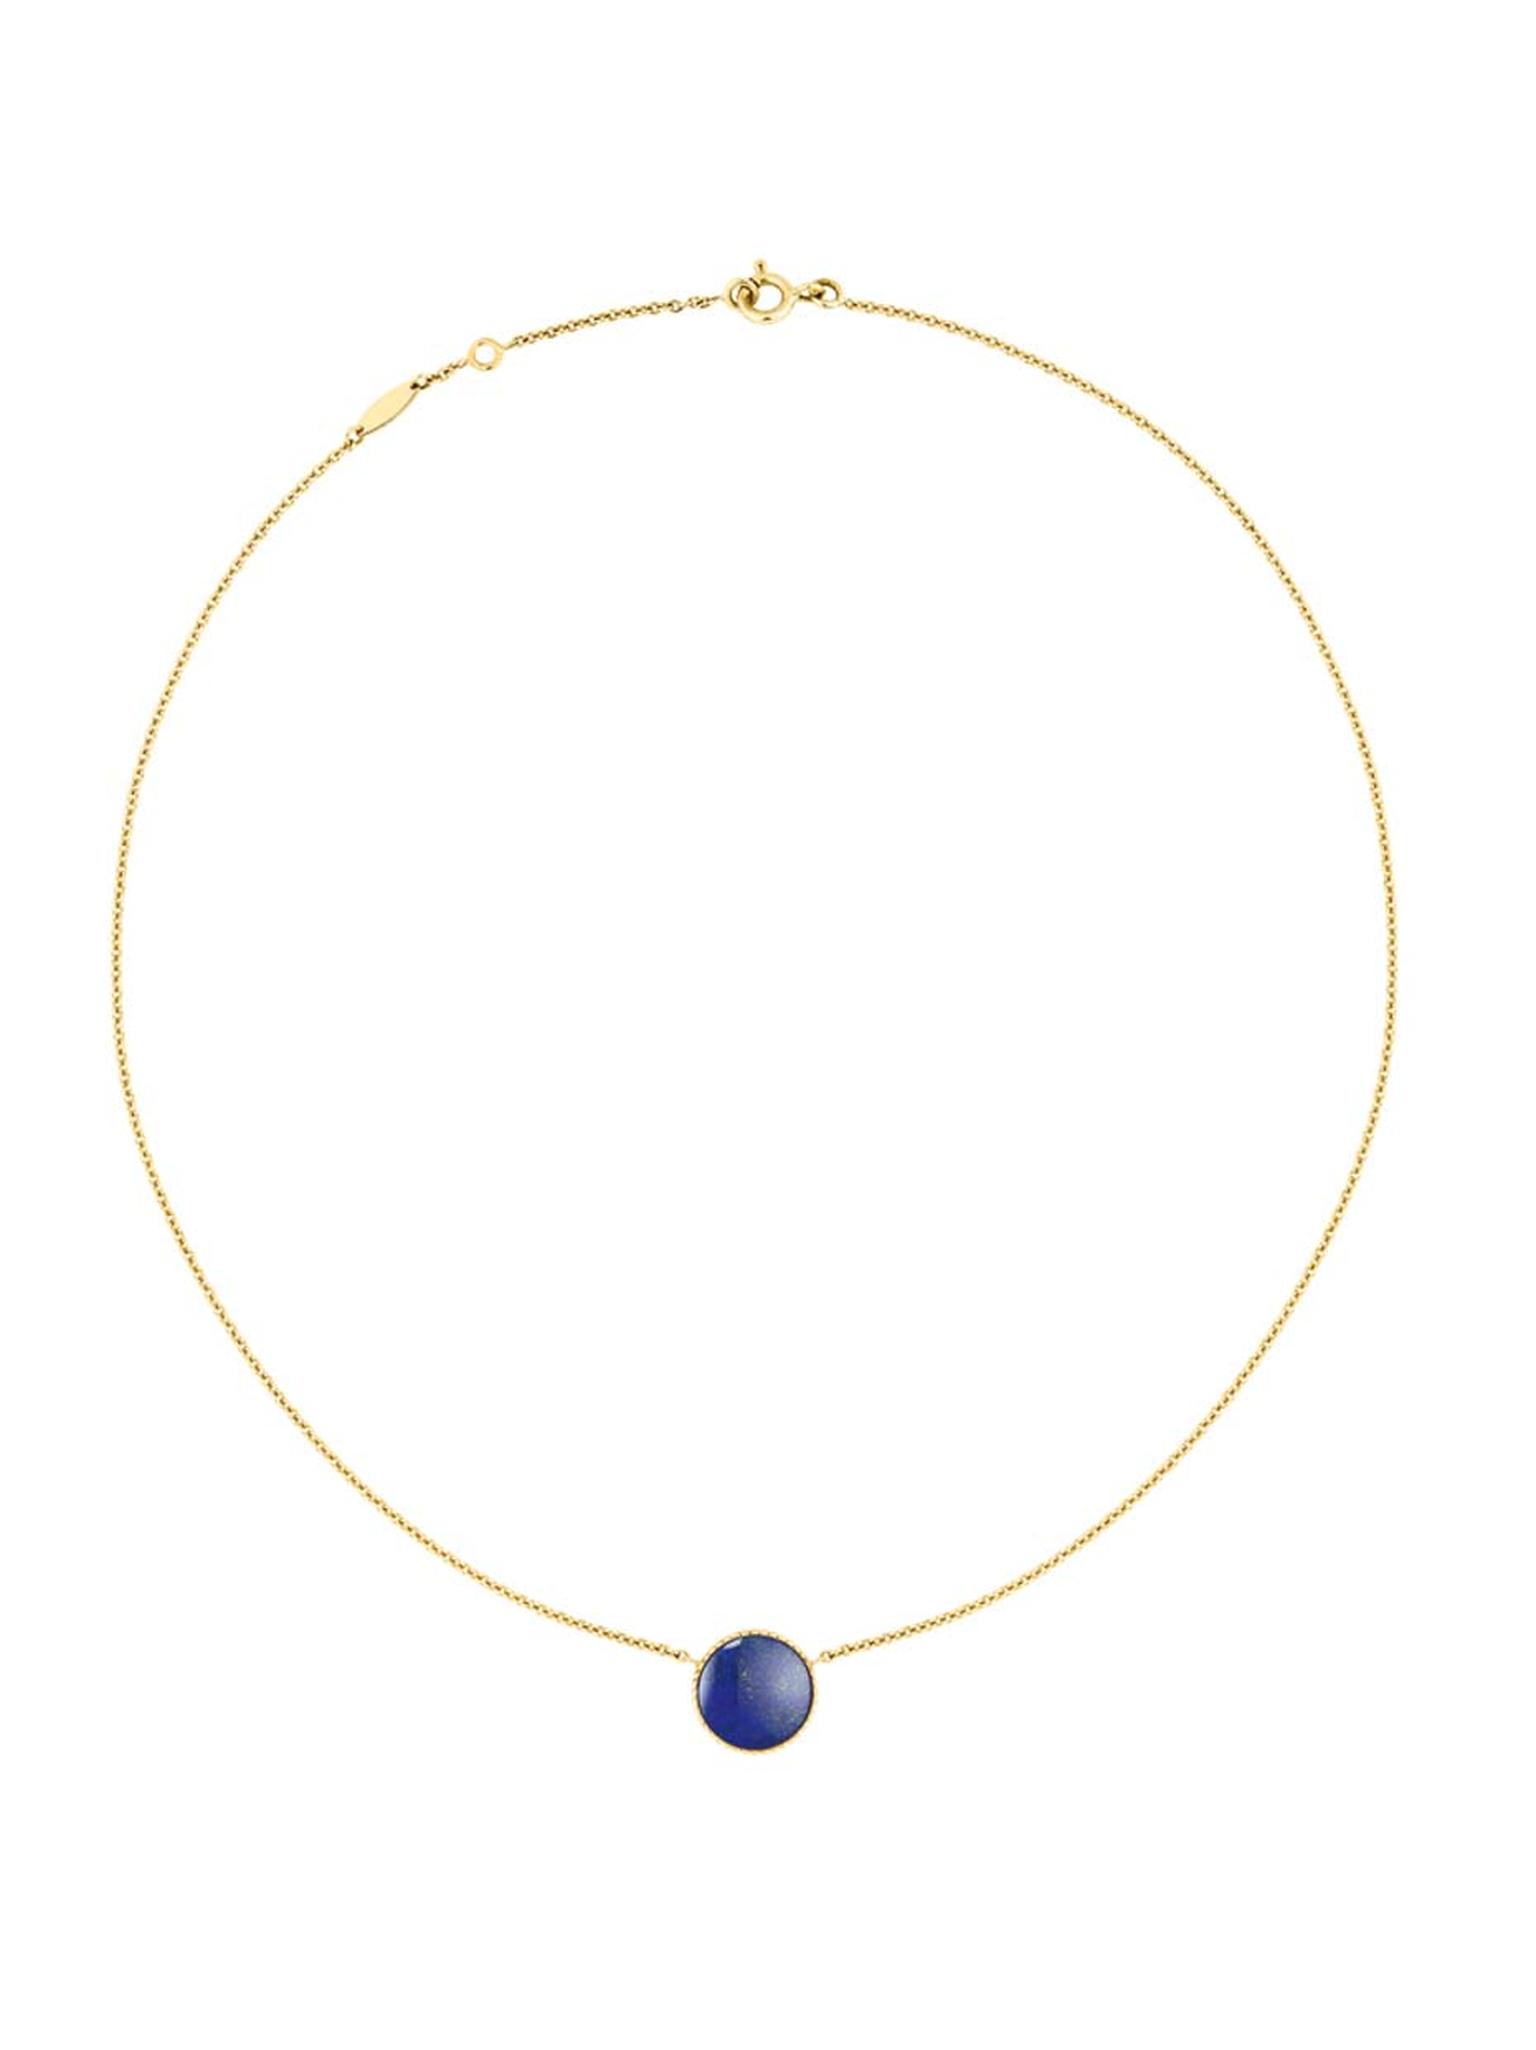 The gemstones featured in Dior's Rose Des Vent collection are said to make reference to ship rigging and the ocean, and this lapis lazuli stone perfectly reflects the colour of the ocean at night.